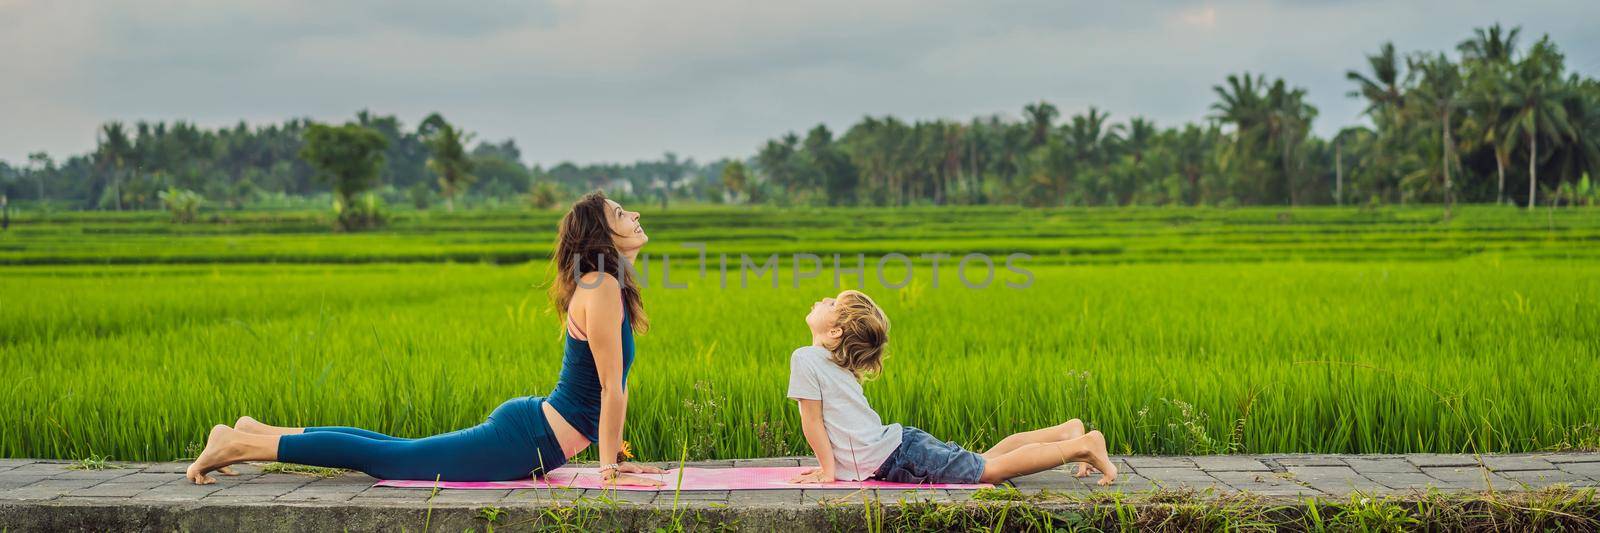 Boy and his yoga teacher doing yoga in a rice field. BANNER, LONG FORMAT